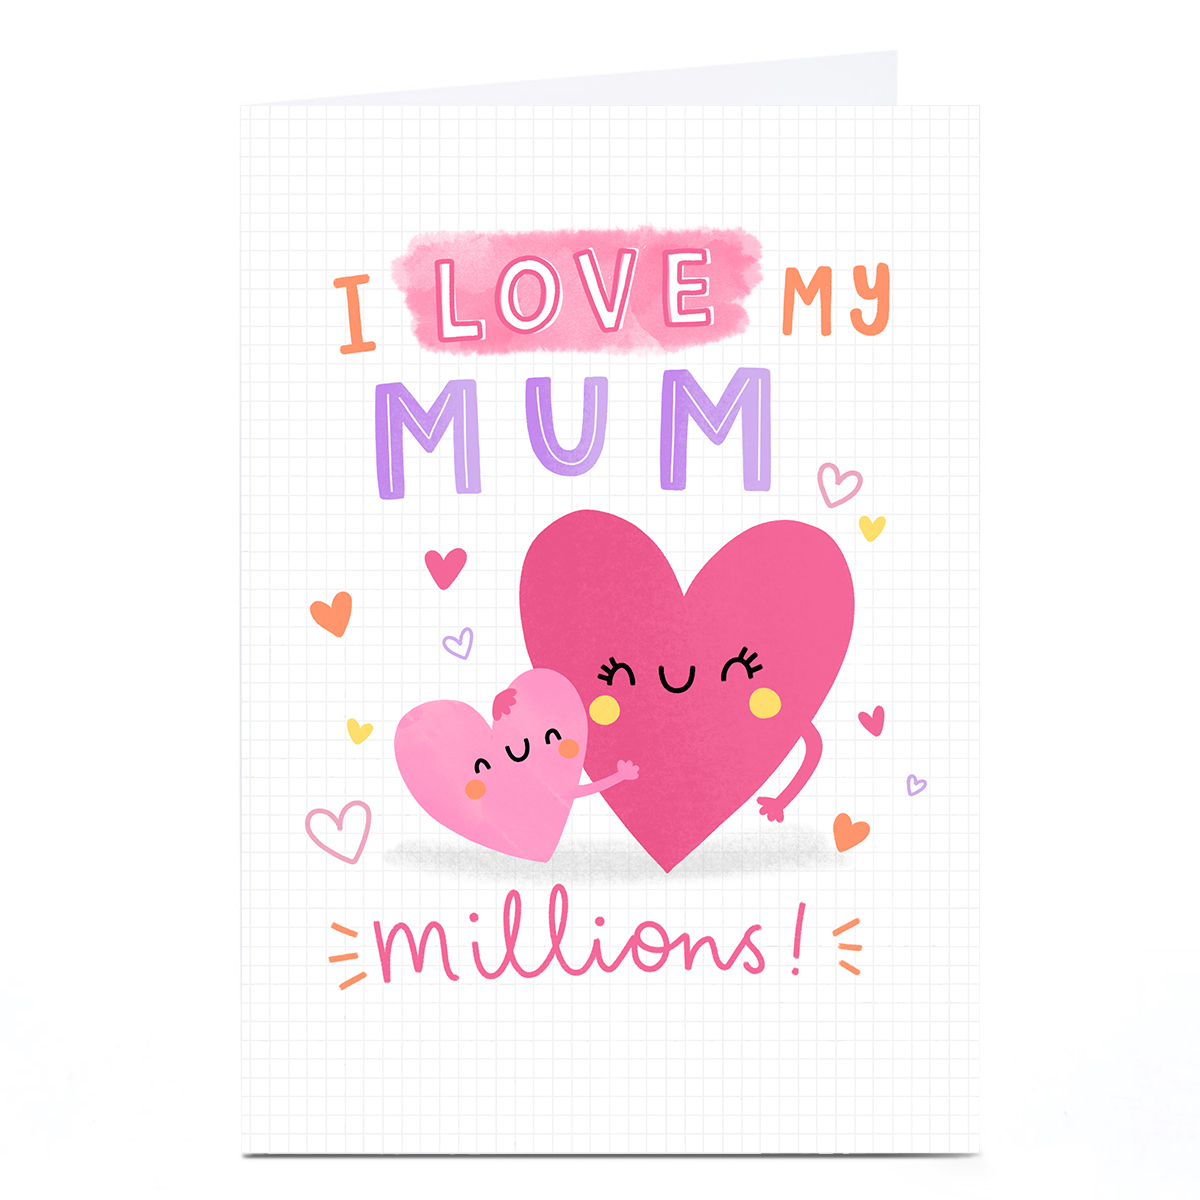 Personalised Jess Moorhouse Mother's Day Card - Love Mum Millions